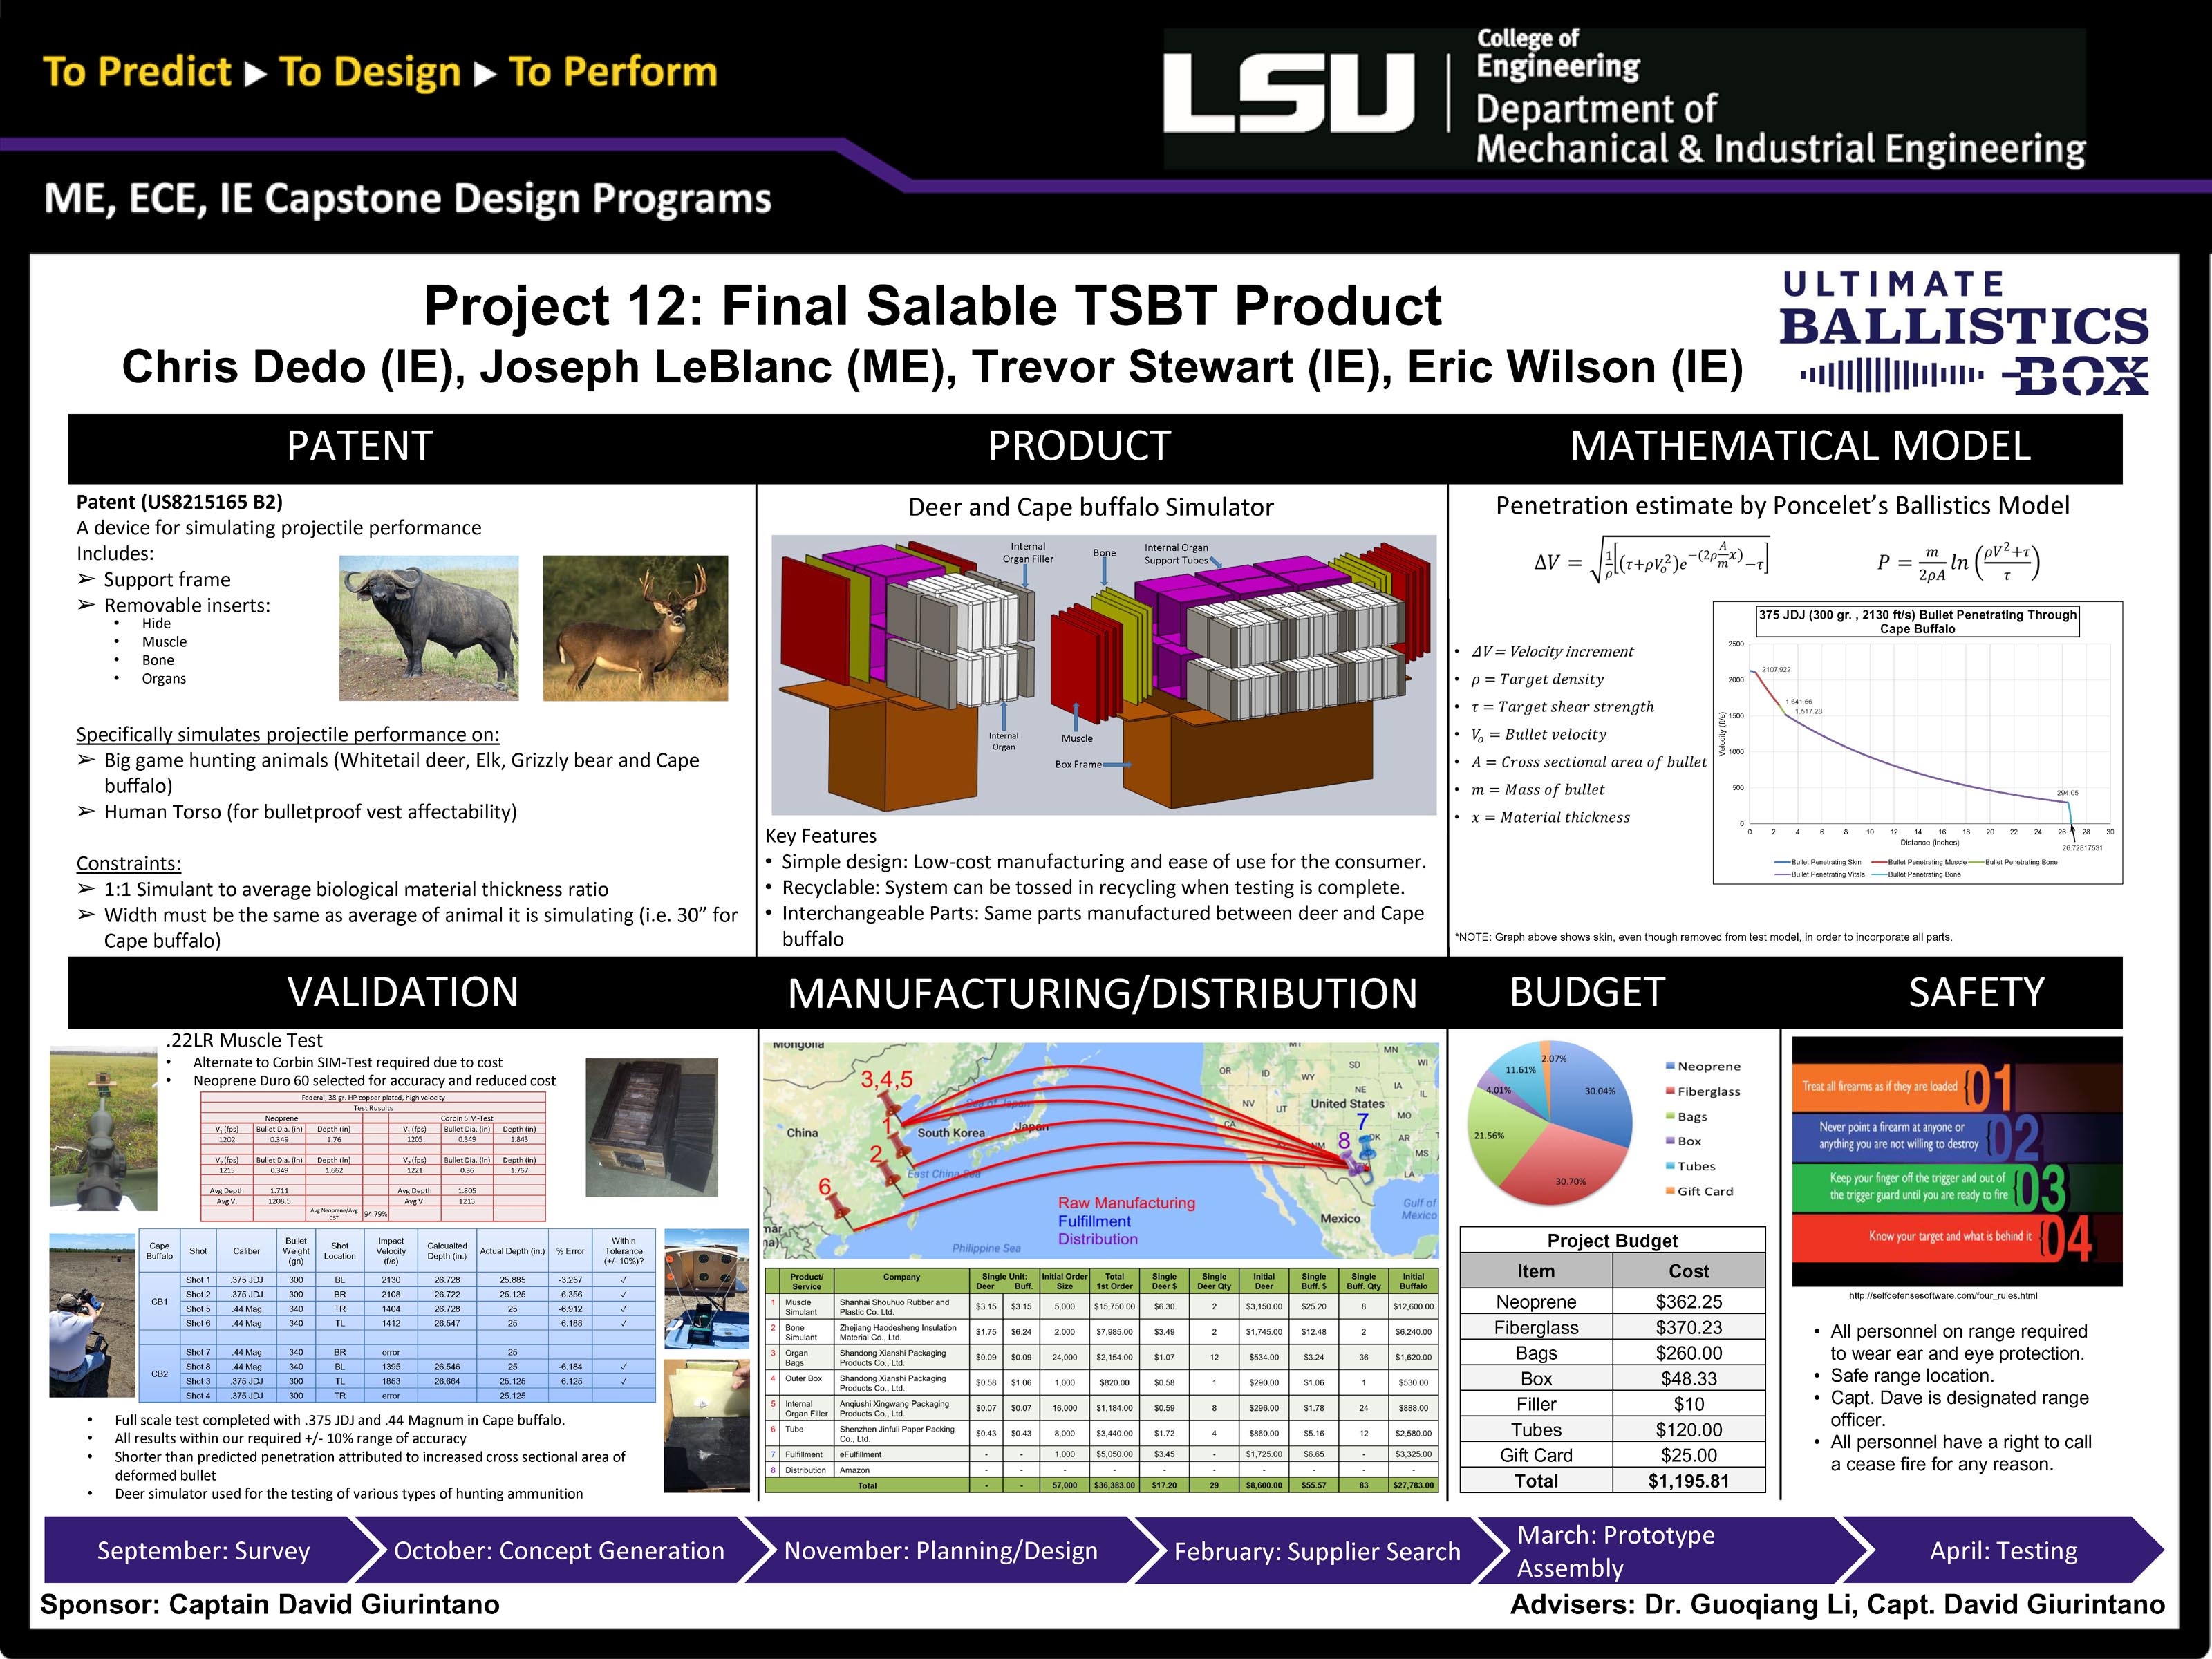 Project 12: Final Salable TSBT Product